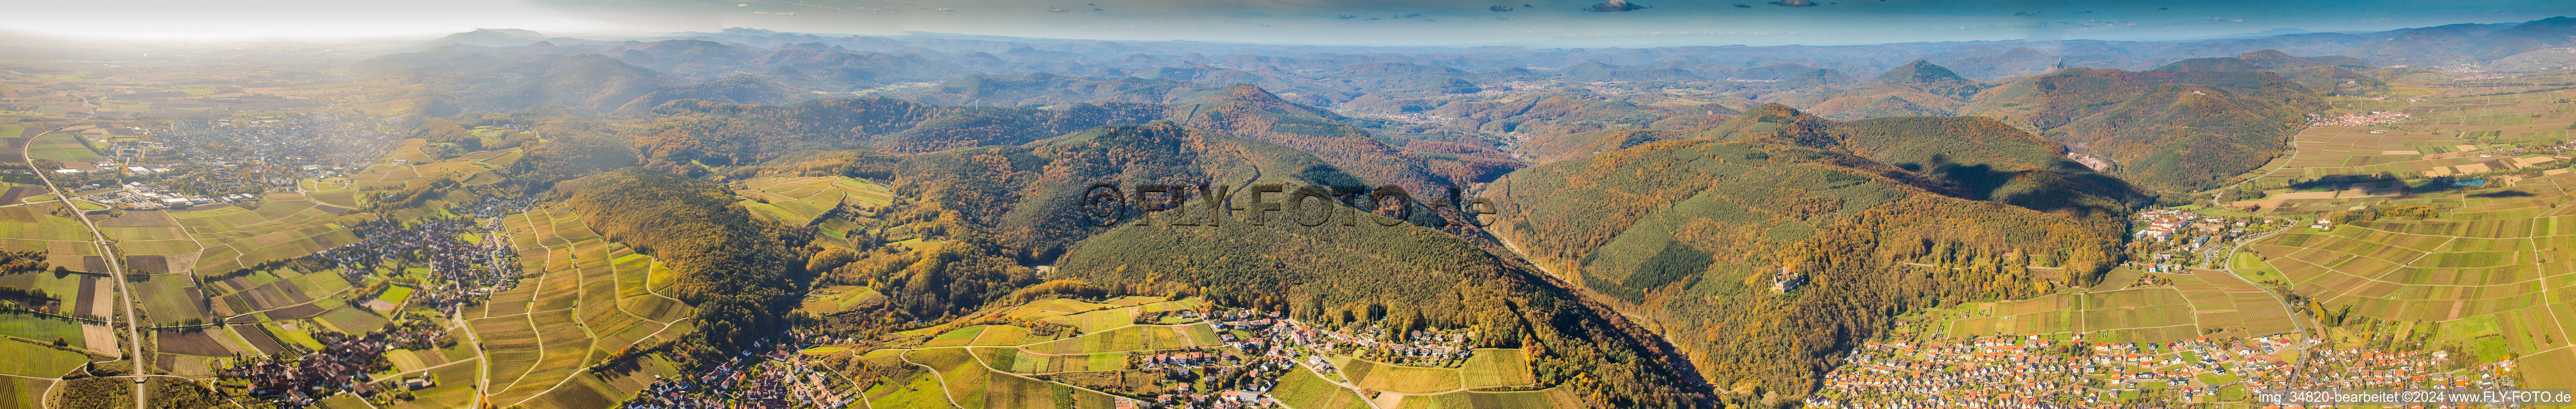 Panoramic perspective of Forest and mountain scenery of Naturpark Pfaelzerwald in Klingenmuenster in the state Rhineland-Palatinate, Germany